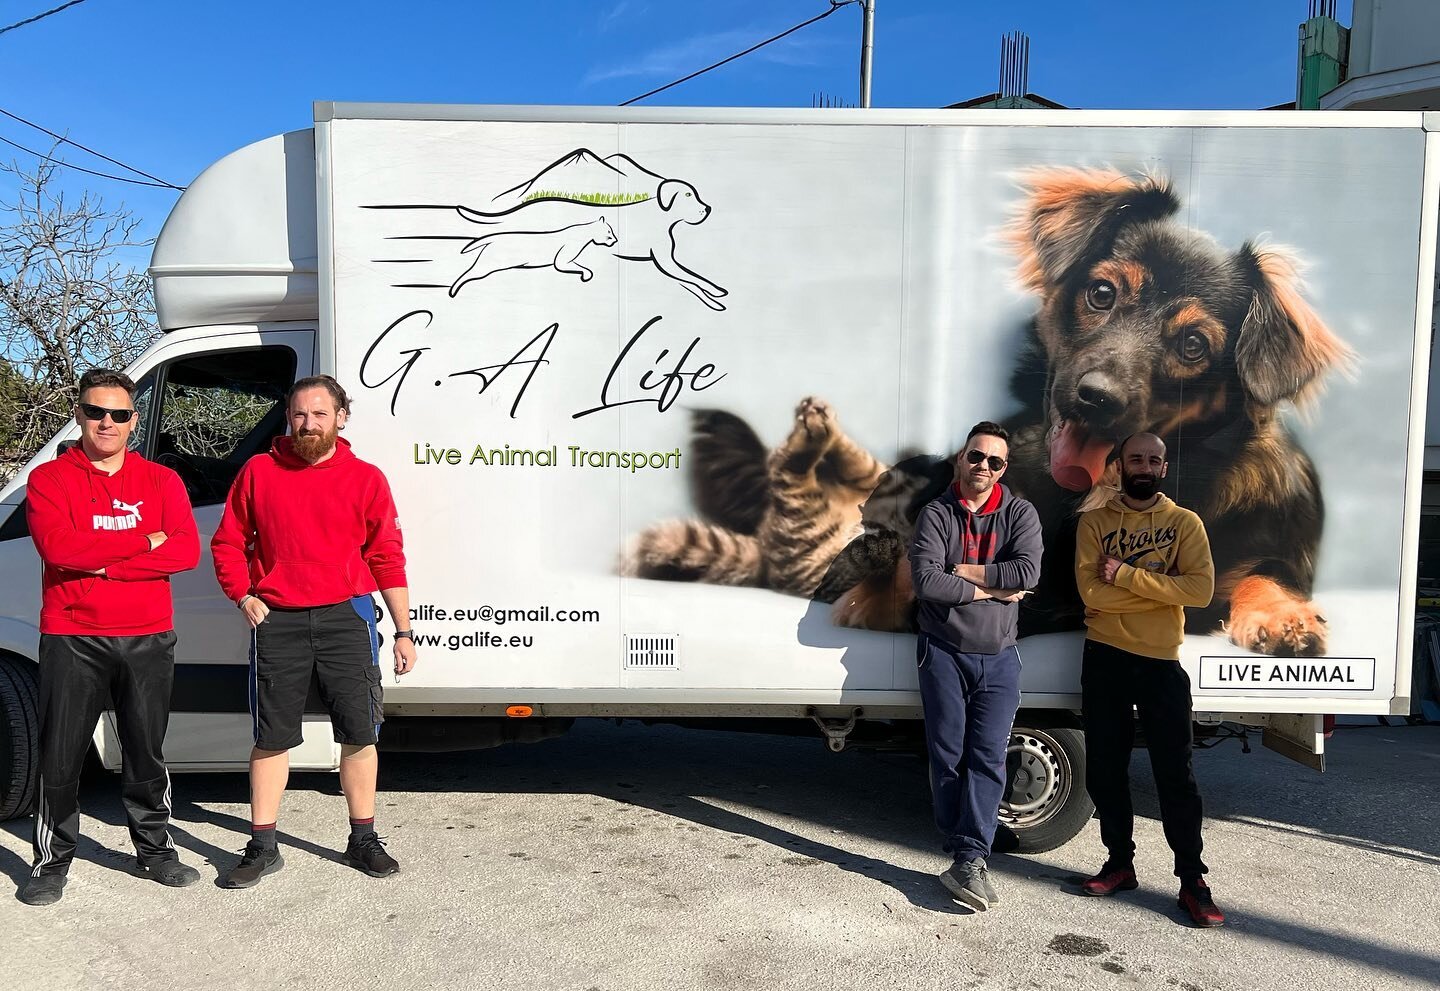 Did you know that G.A Life has 2 driver teams? Team 1 George and Kostas (right) and team 2 of Giannis and Konstantinos (left). Which team did your pet come home with? Team 1 or Team 2? 🙋🏻&zwj;♂️🙋🏻&zwj;♂️🐕🐈